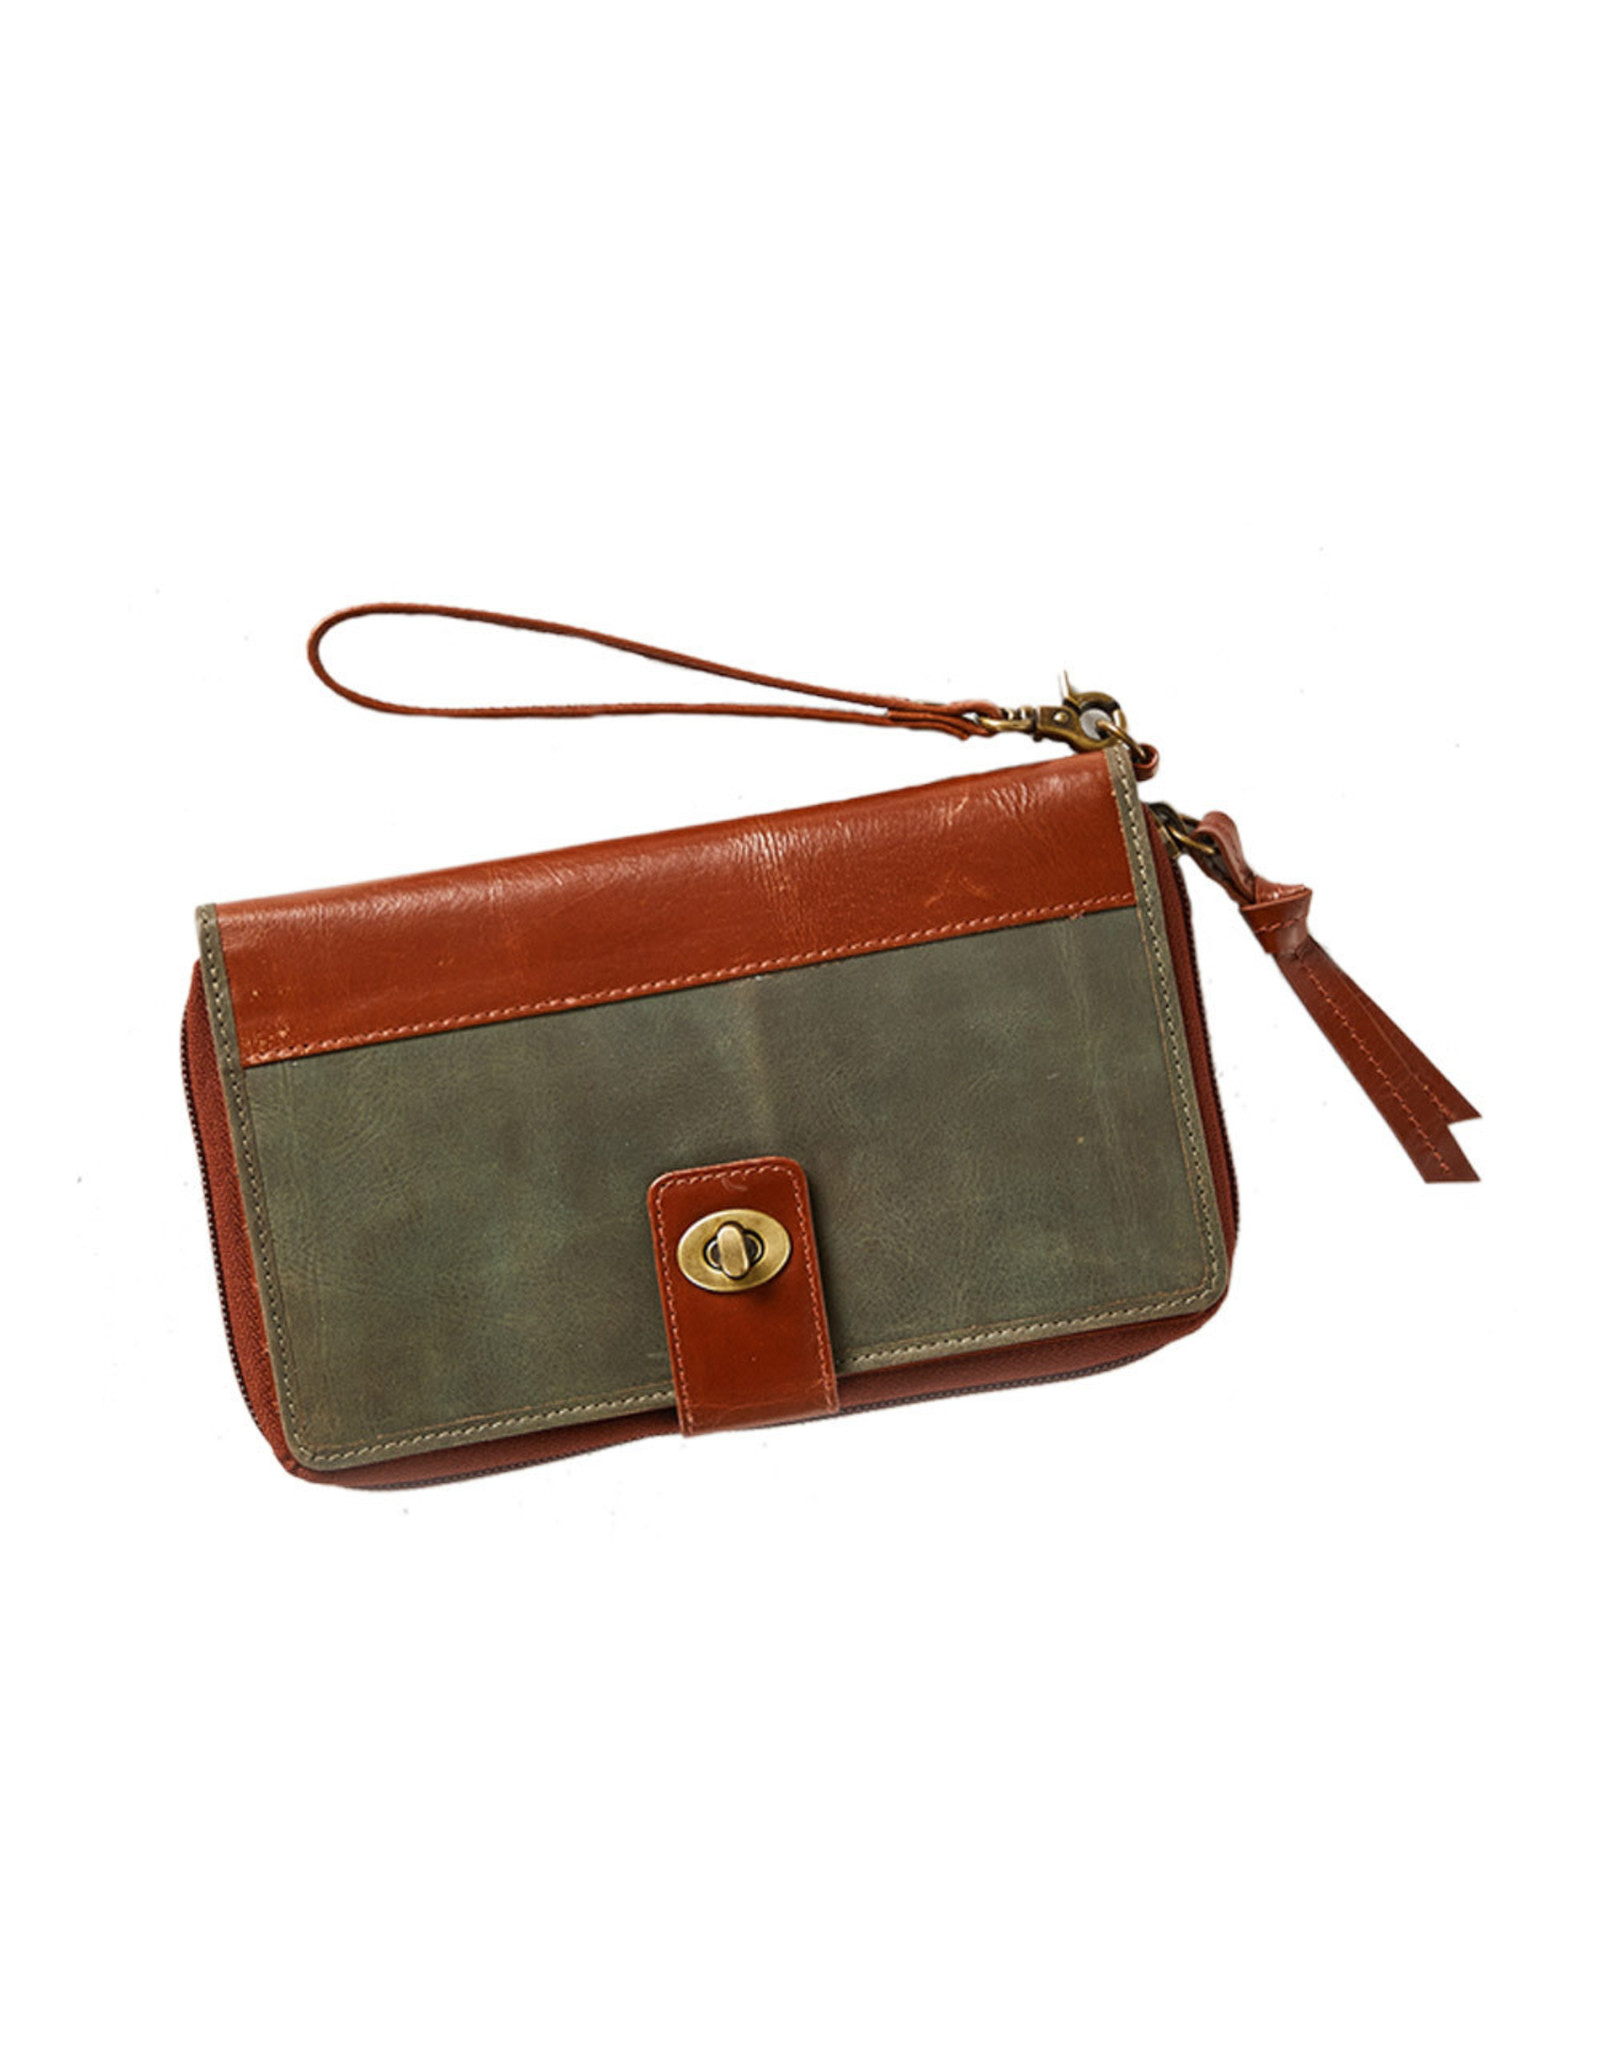 Trade roots Shilani Leather Wallet, India